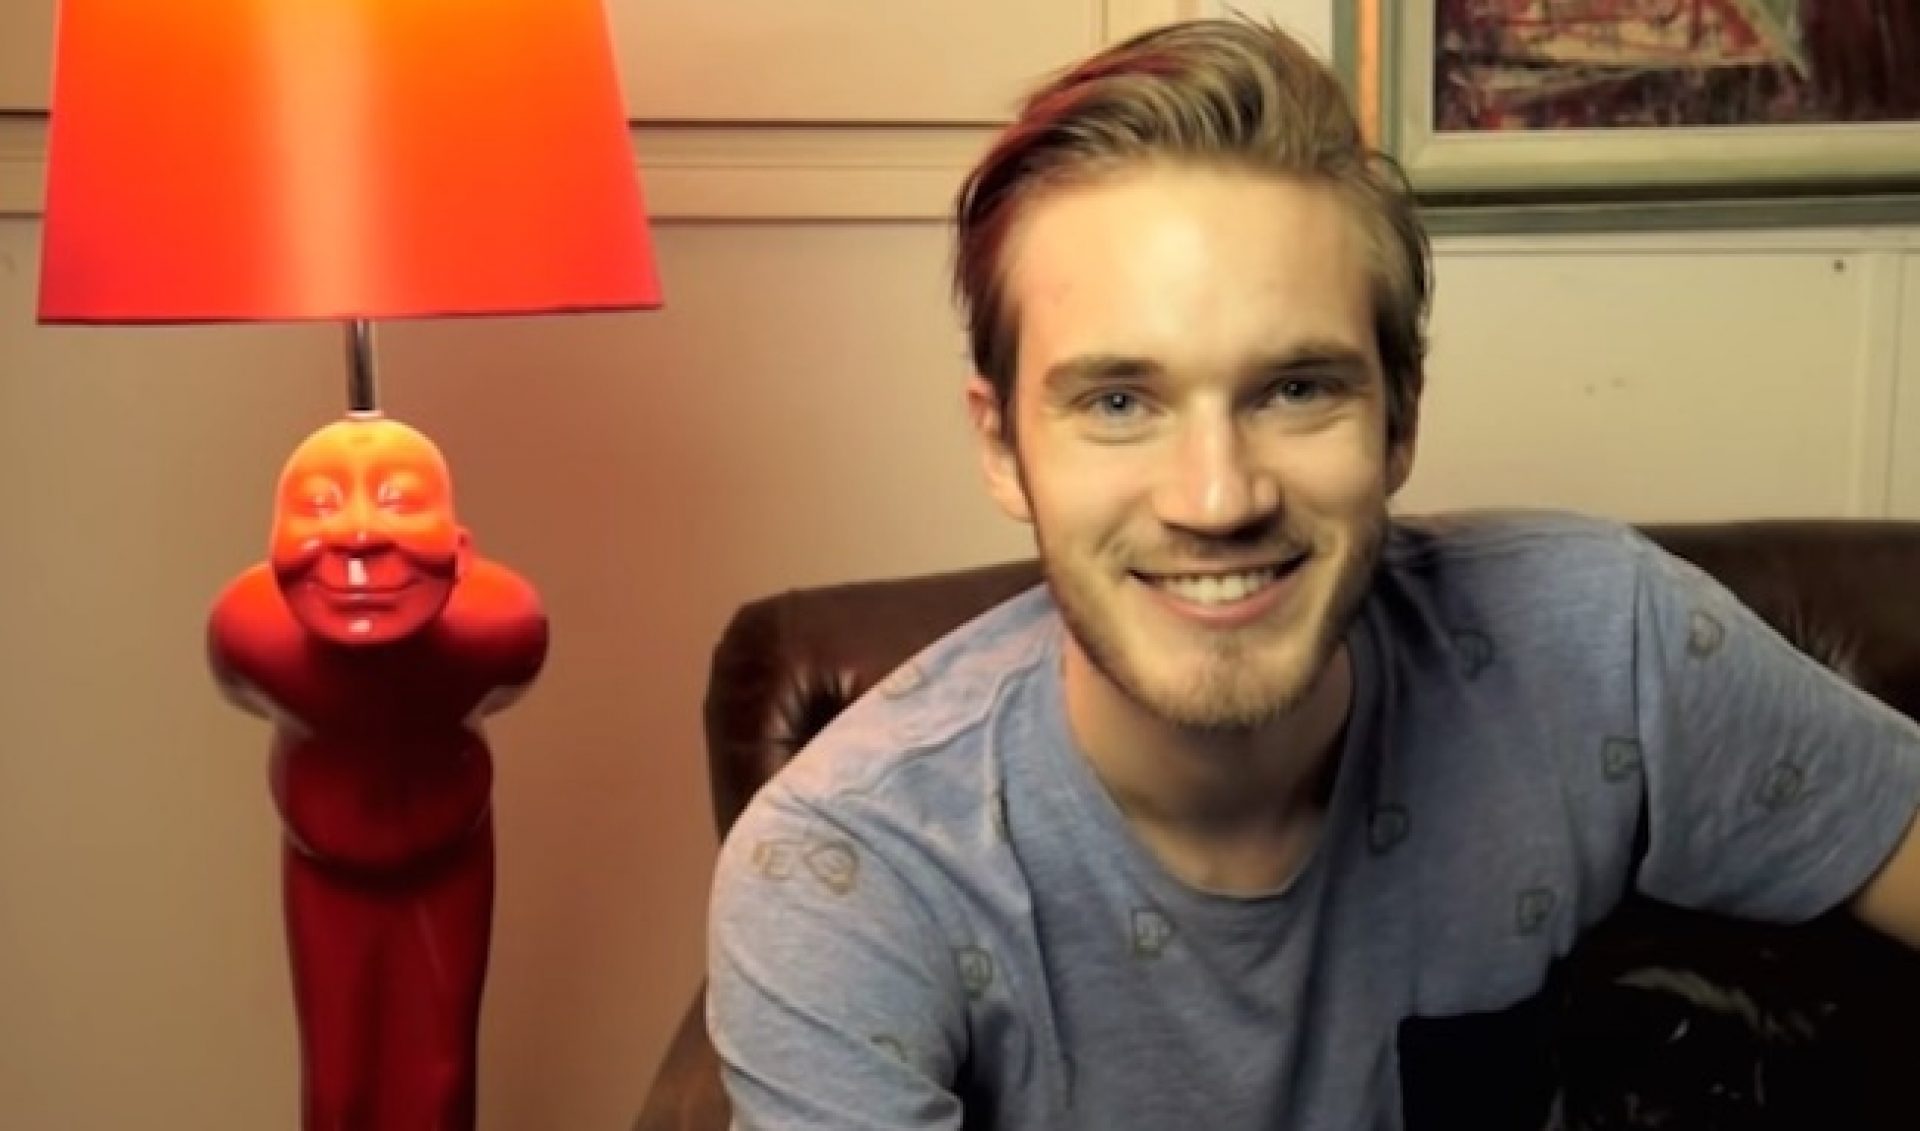 PewDiePie Hits 34 Million YouTube Subscribers, Adds One Every 2.9 Seconds